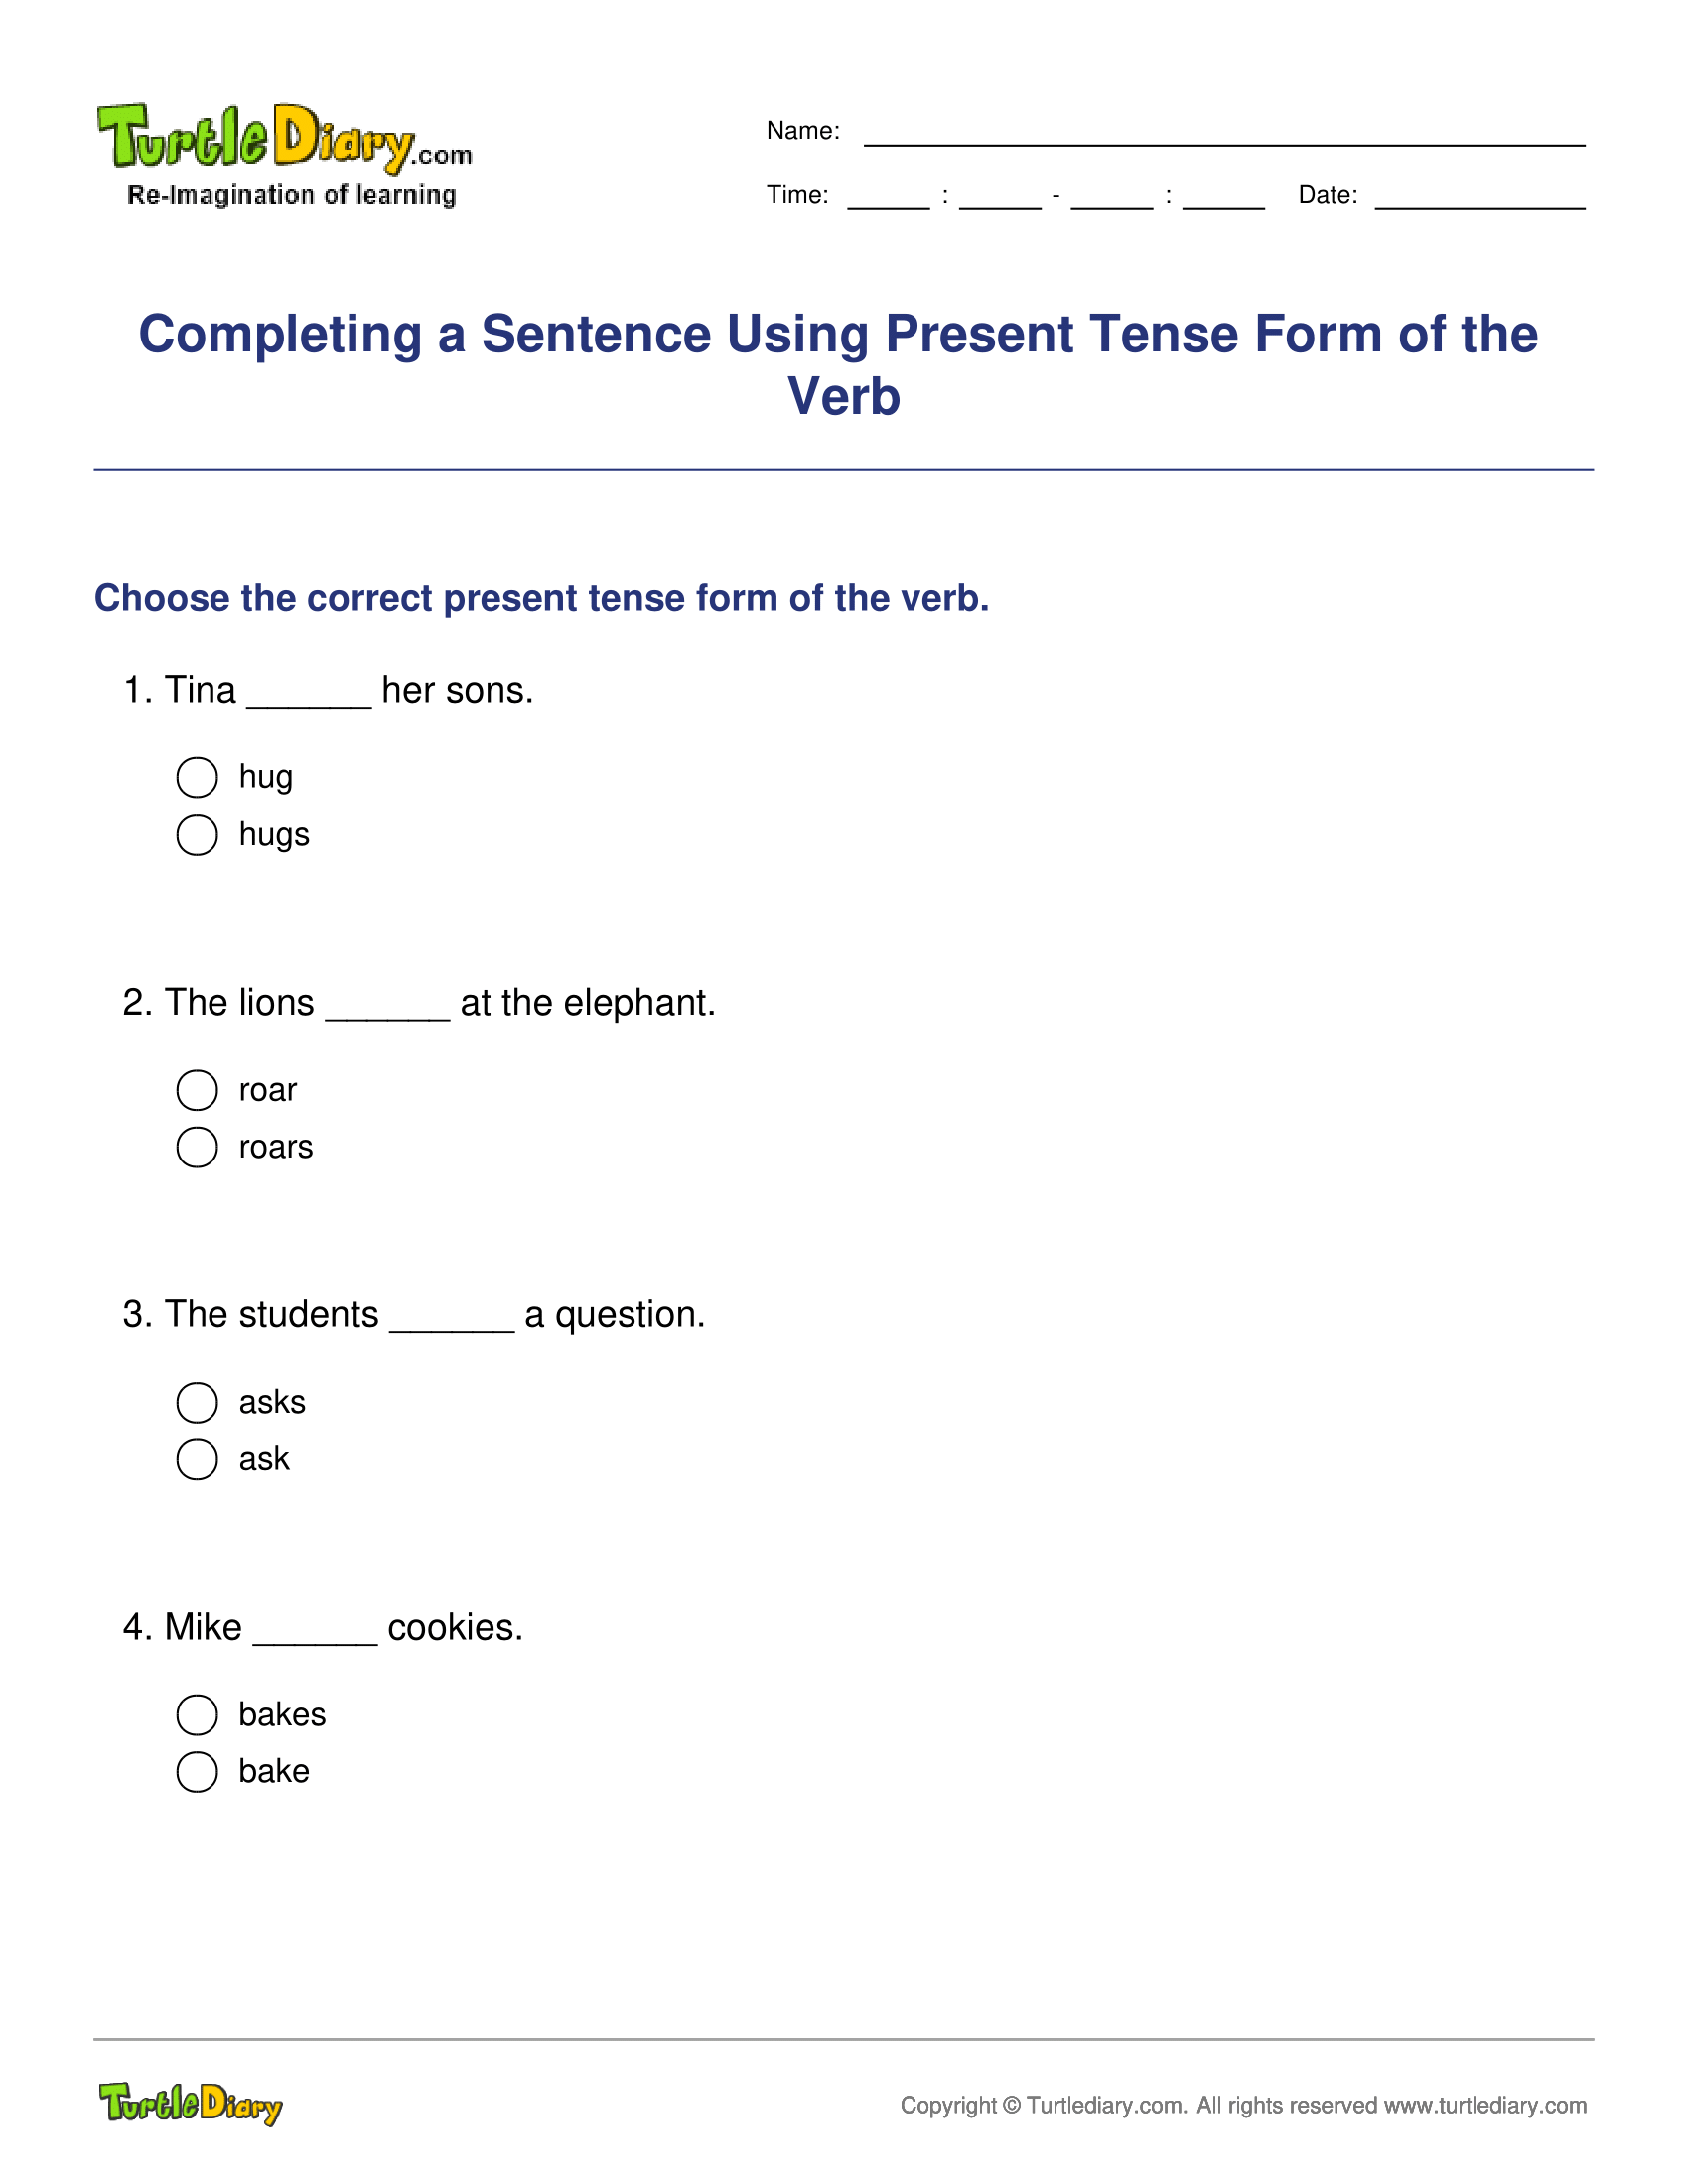 Completing a Sentence Using Present Tense Form of the Verb